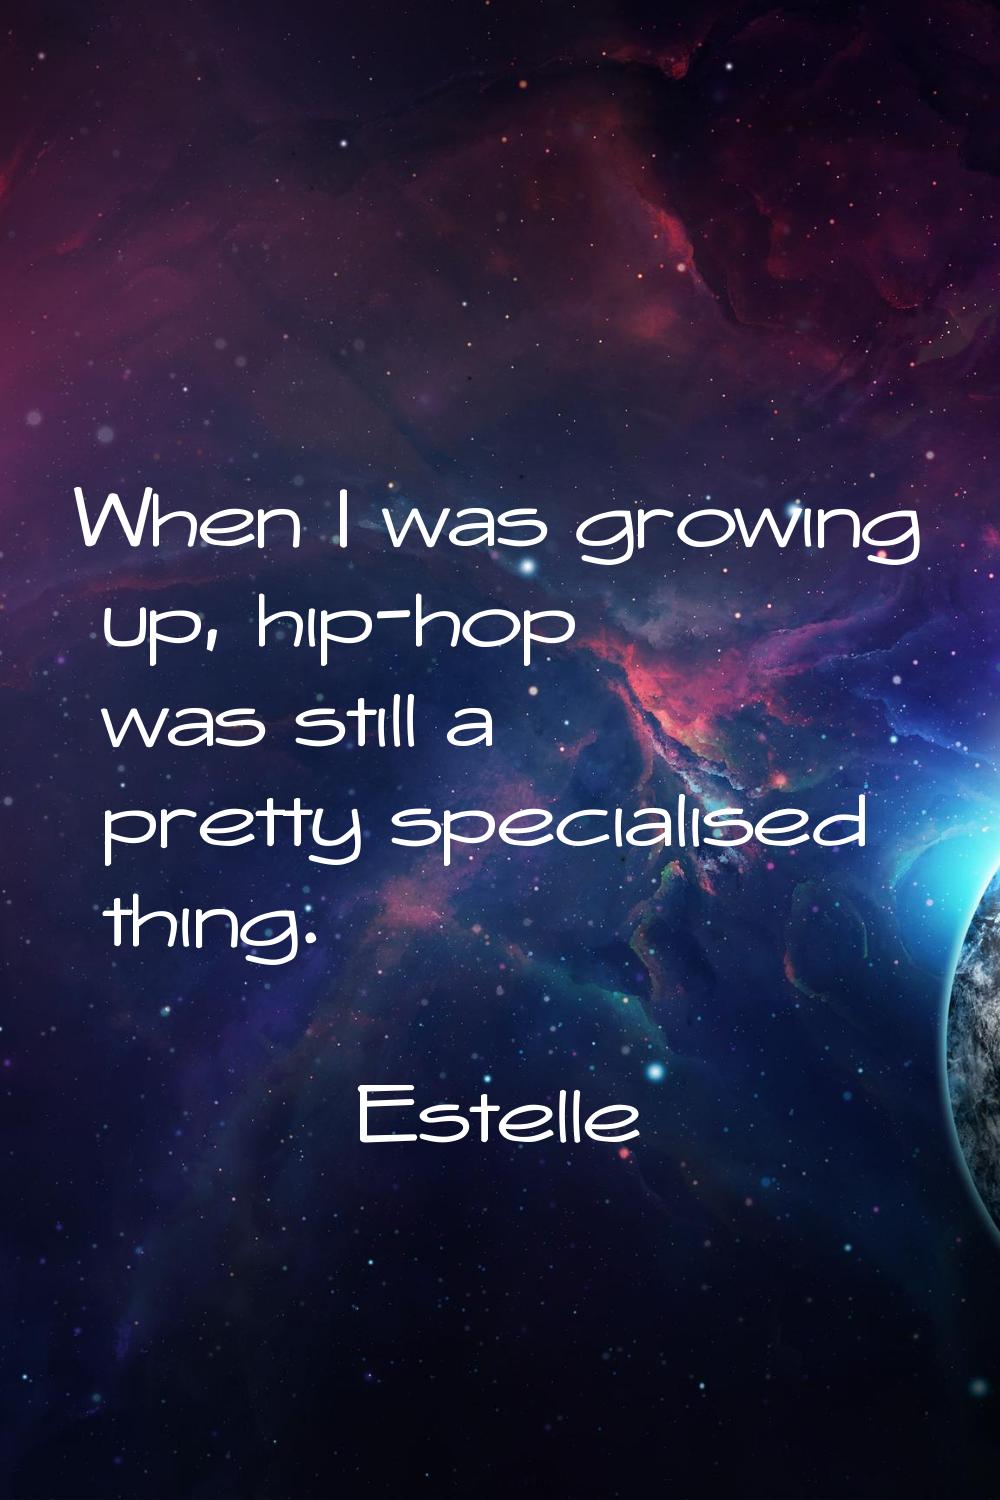 When I was growing up, hip-hop was still a pretty specialised thing.